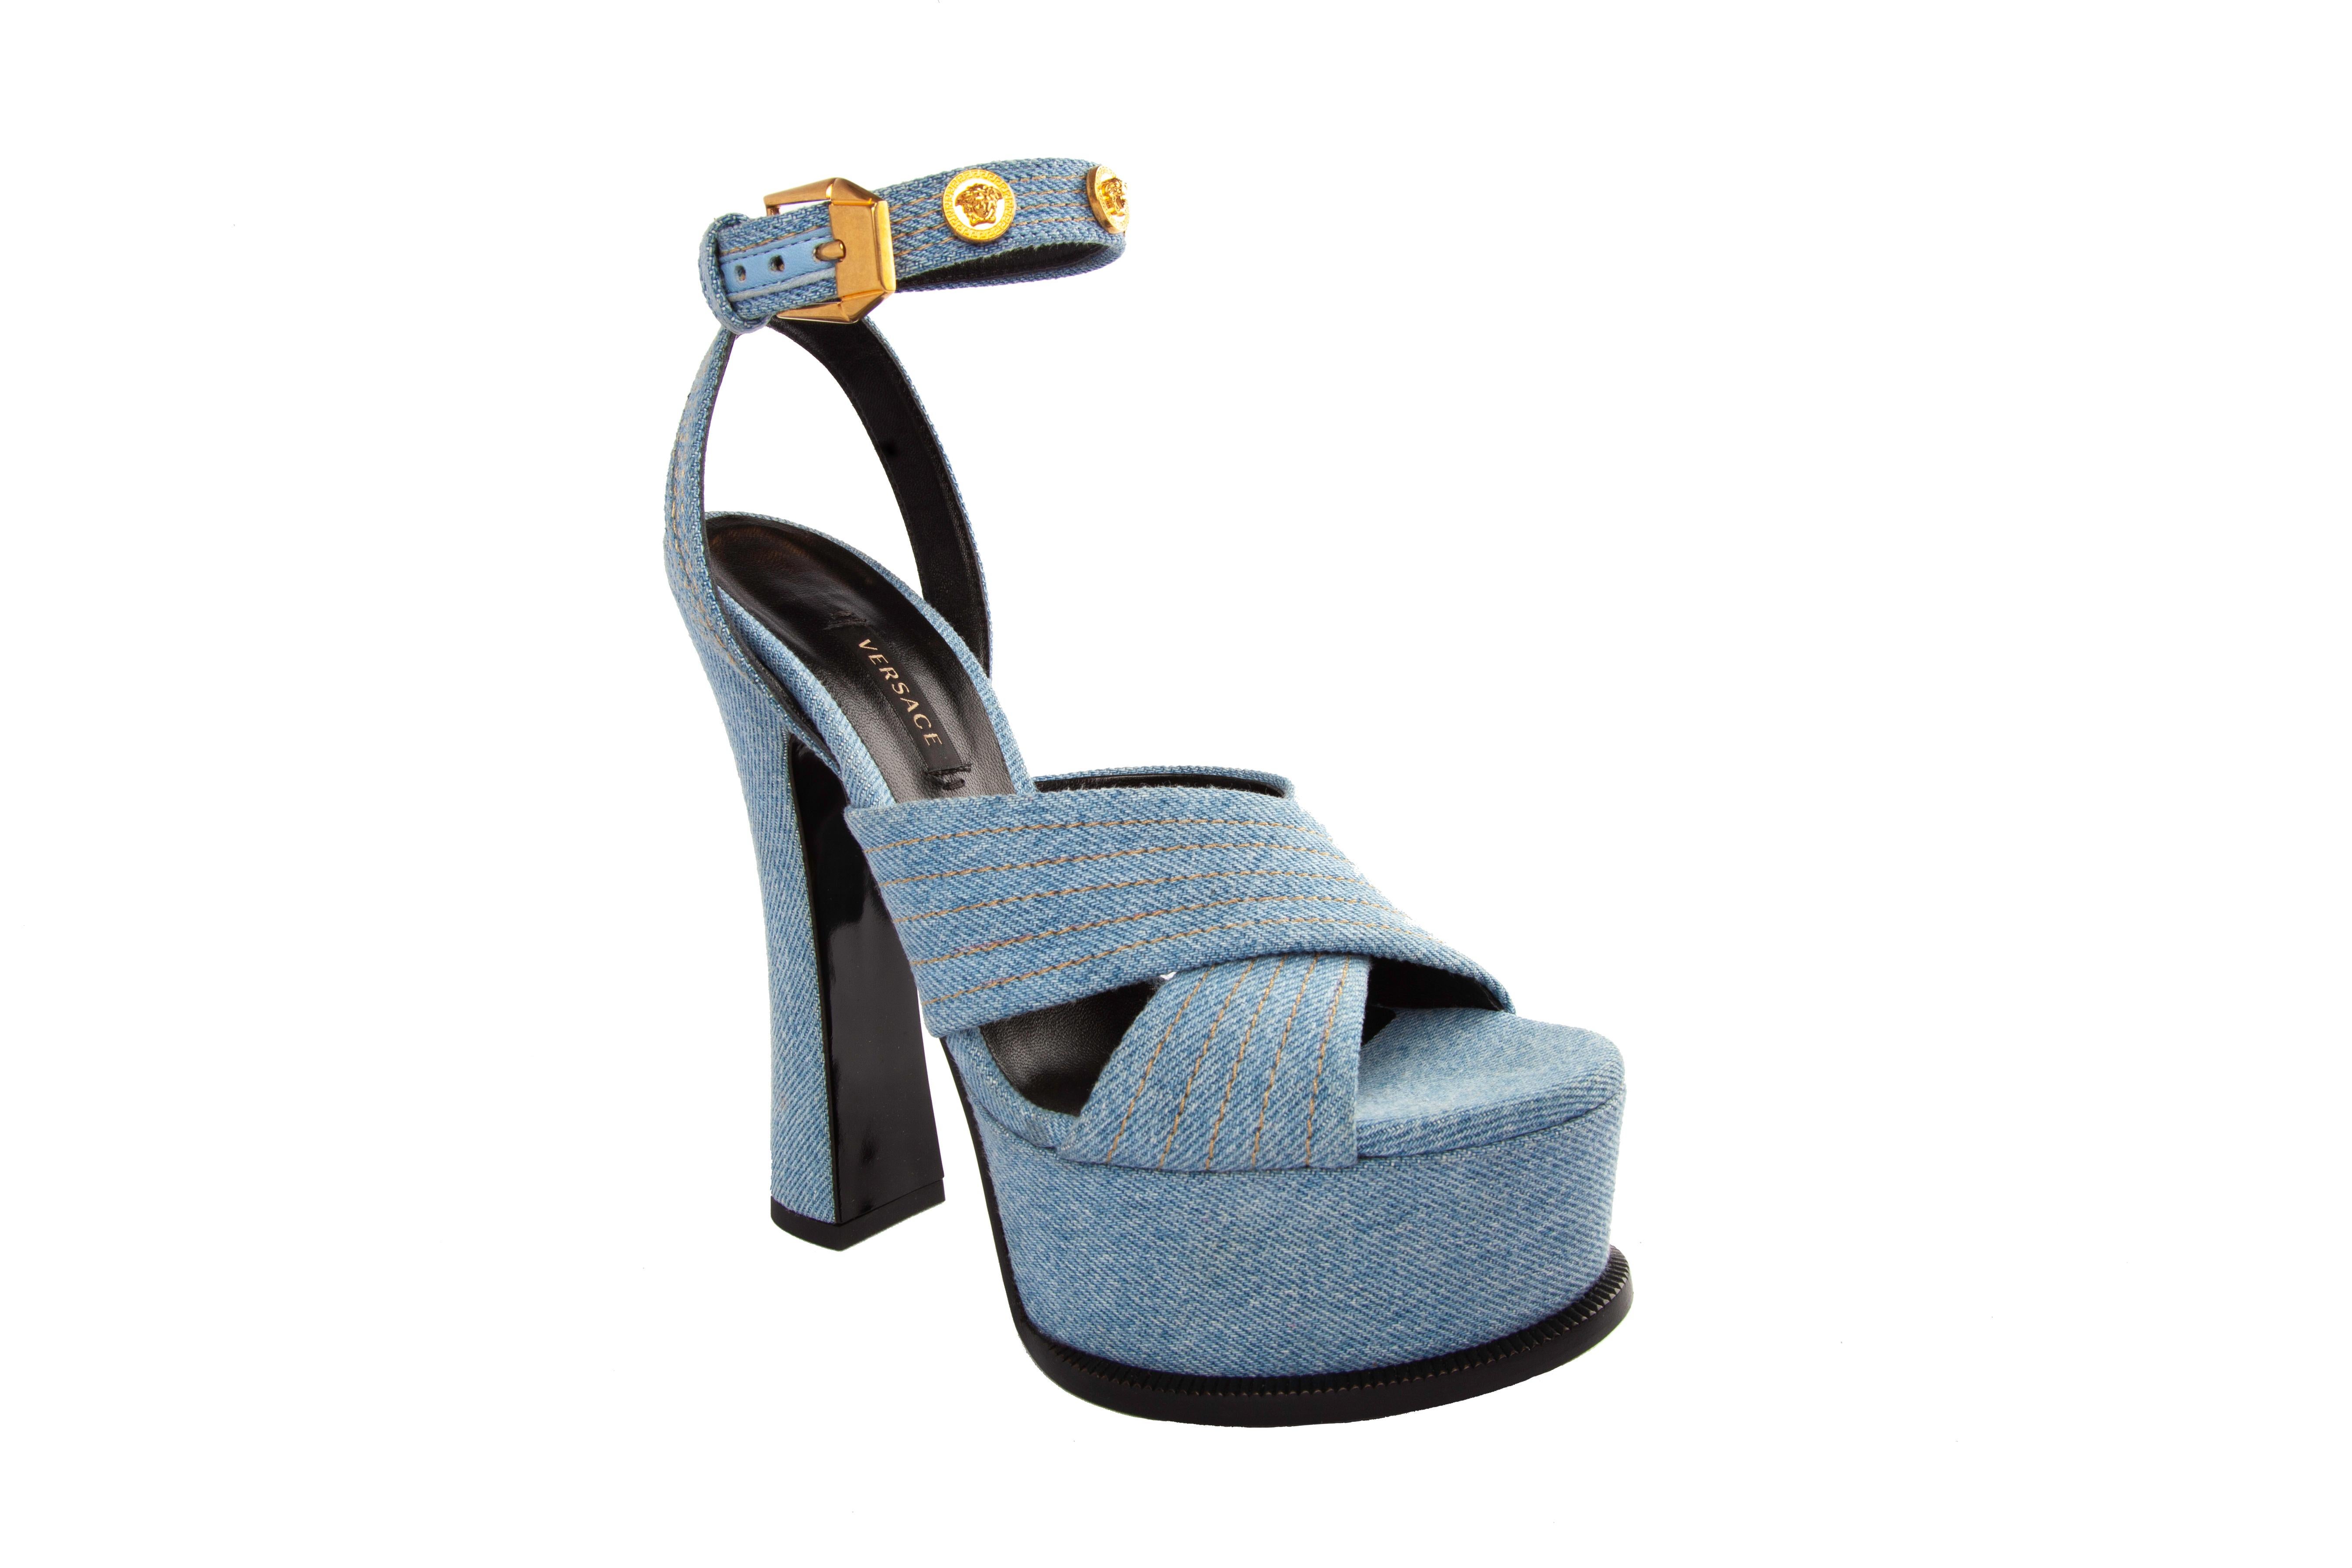 Versace Blue Denim High Heel Platform Sandal With Gold Tone Hardware Size 38.5

These Versace sandals feature a light blue denim fabric, gold tone Medusa studs, and an adjustable ankle strap. This pair was the store display model, so it shoes very